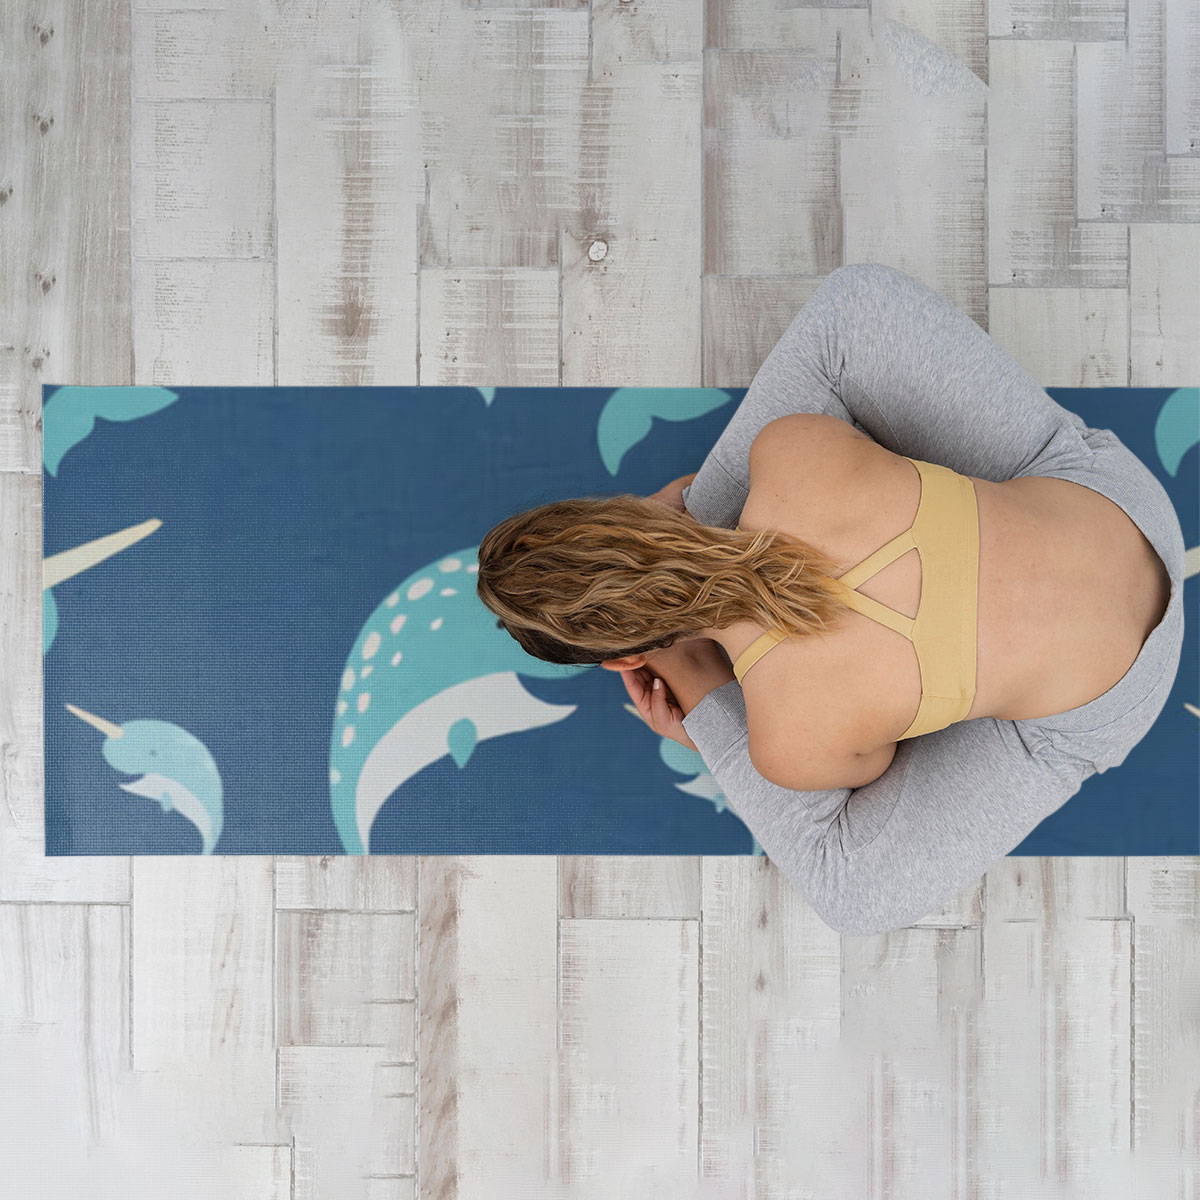 Big And Small Narwhal Yoga Mat